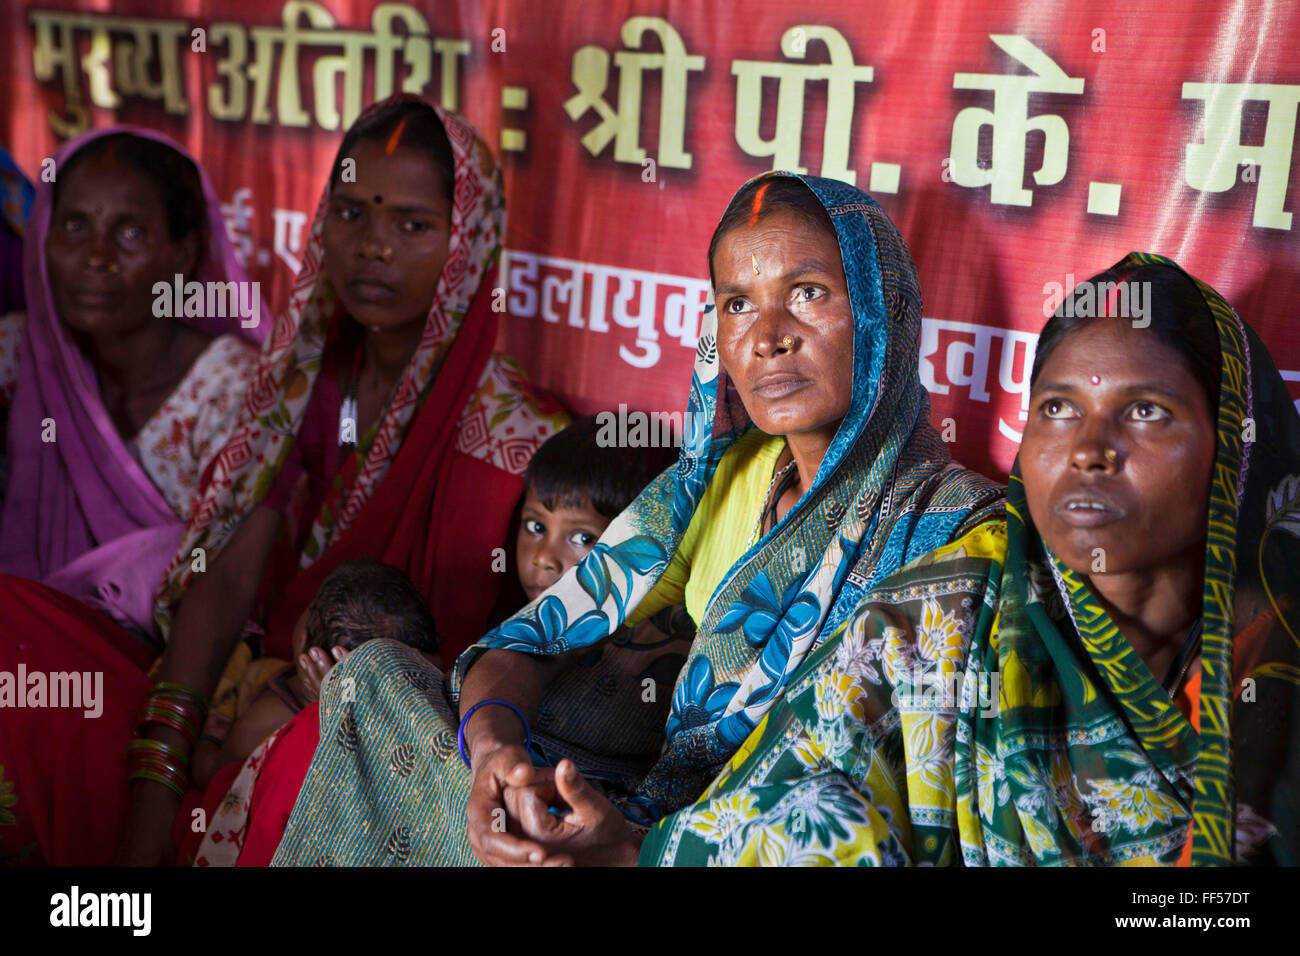 Women from the Musahar community meet monthly to discuss local issues. This project is part of the MSS program on Dalit rights. 'Inclusive development of Musahar community', targeting Musahar villages in the Maharjganj district. Stock Photo